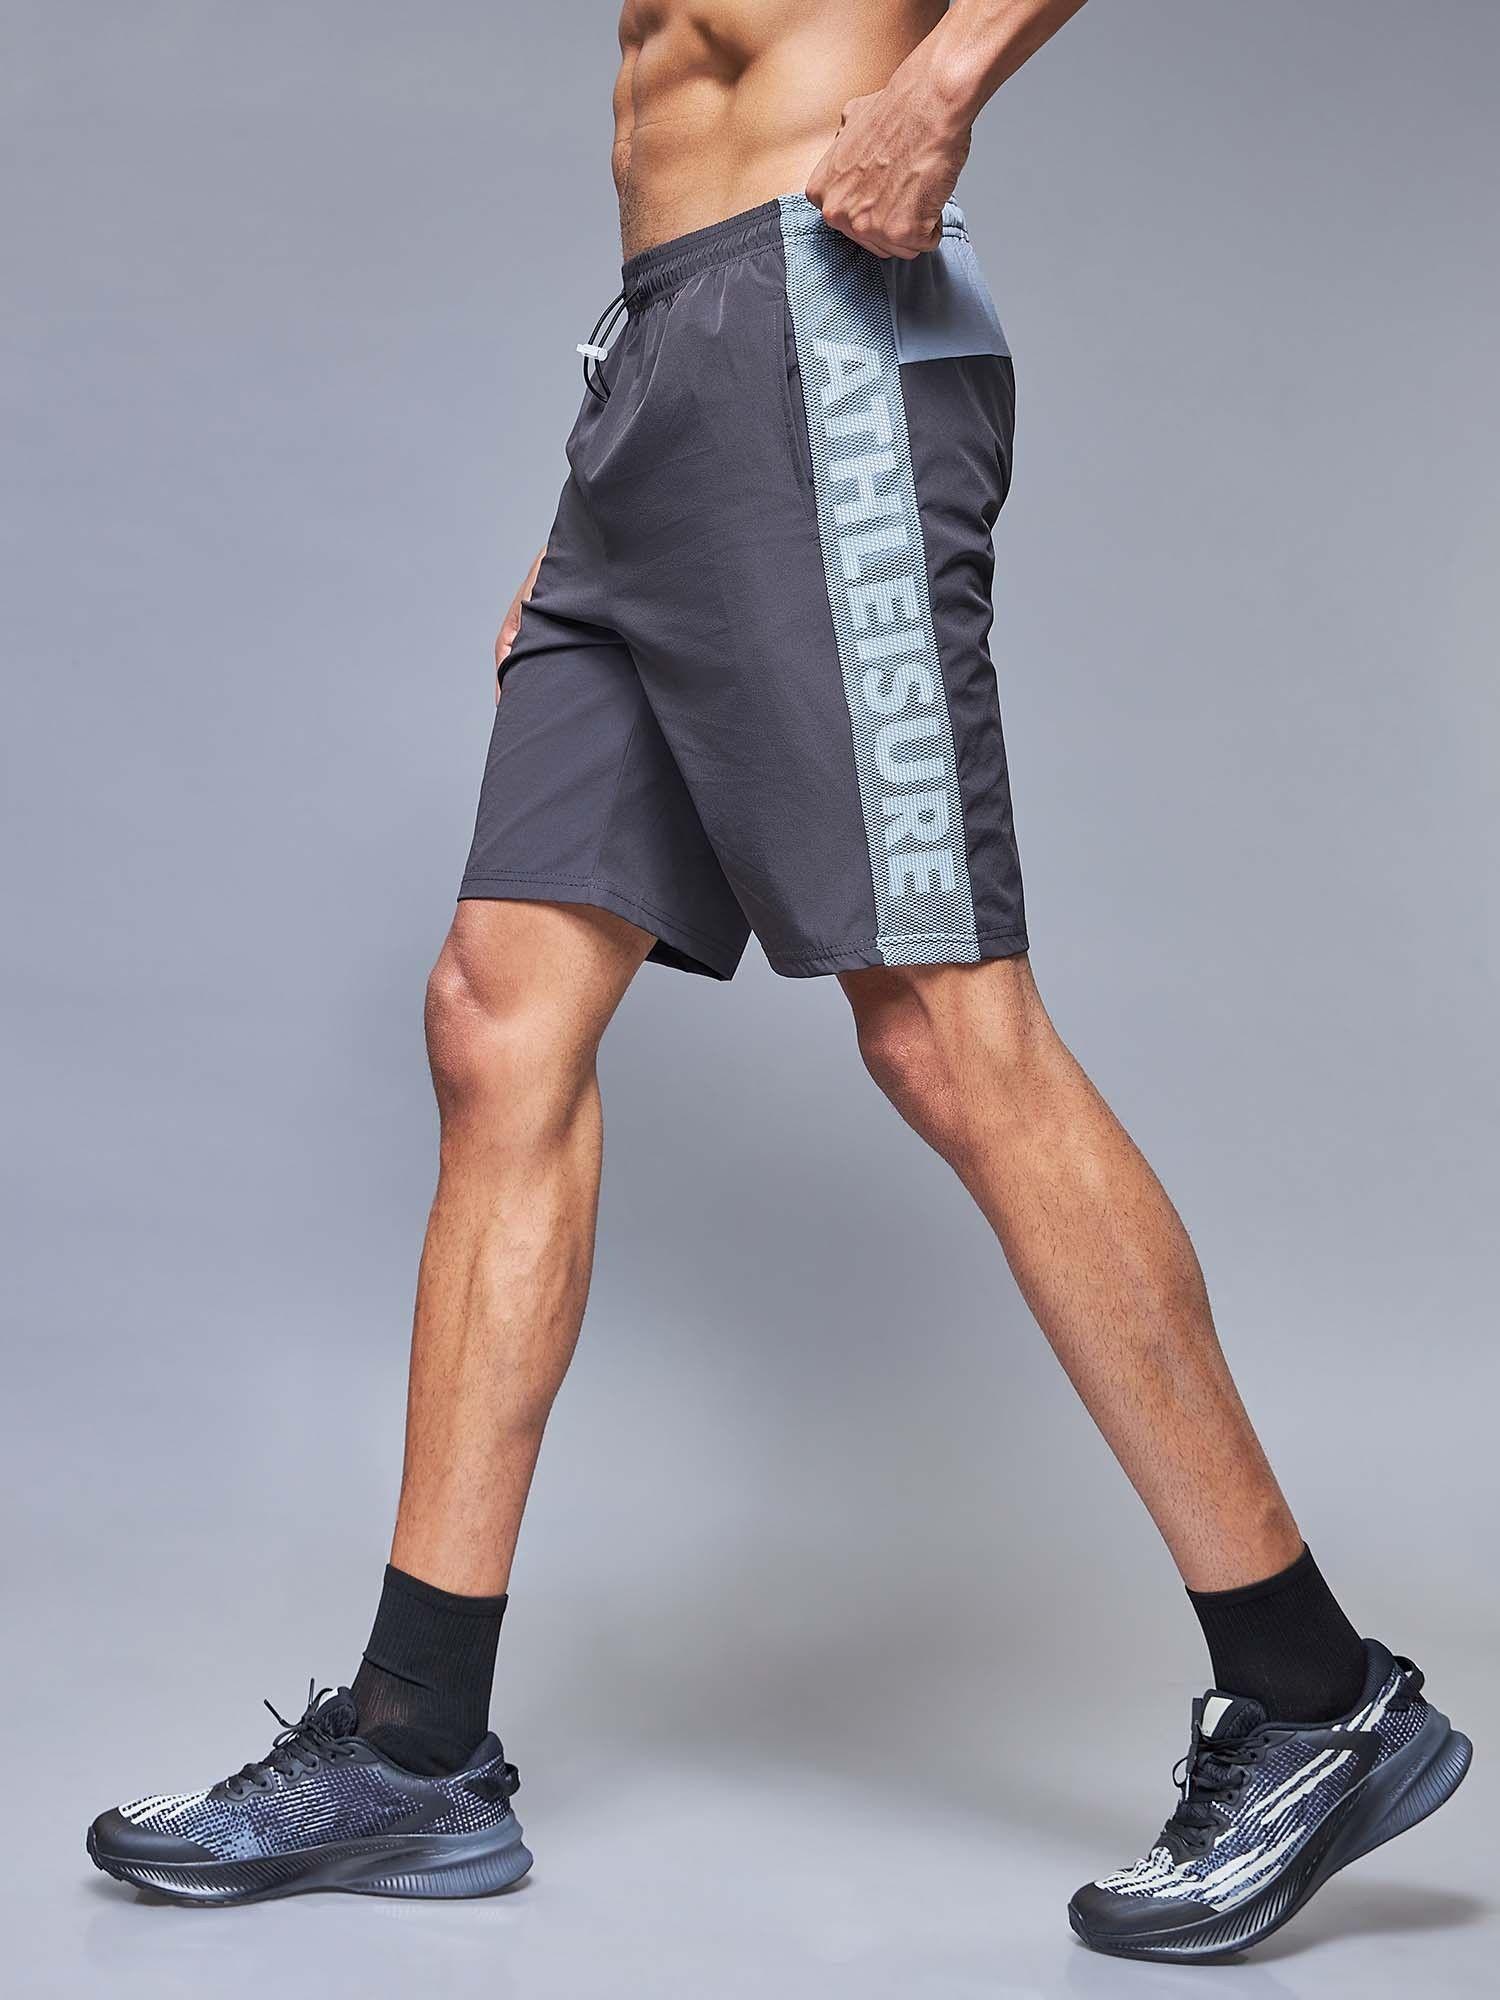 grey chase rapid dry shorts